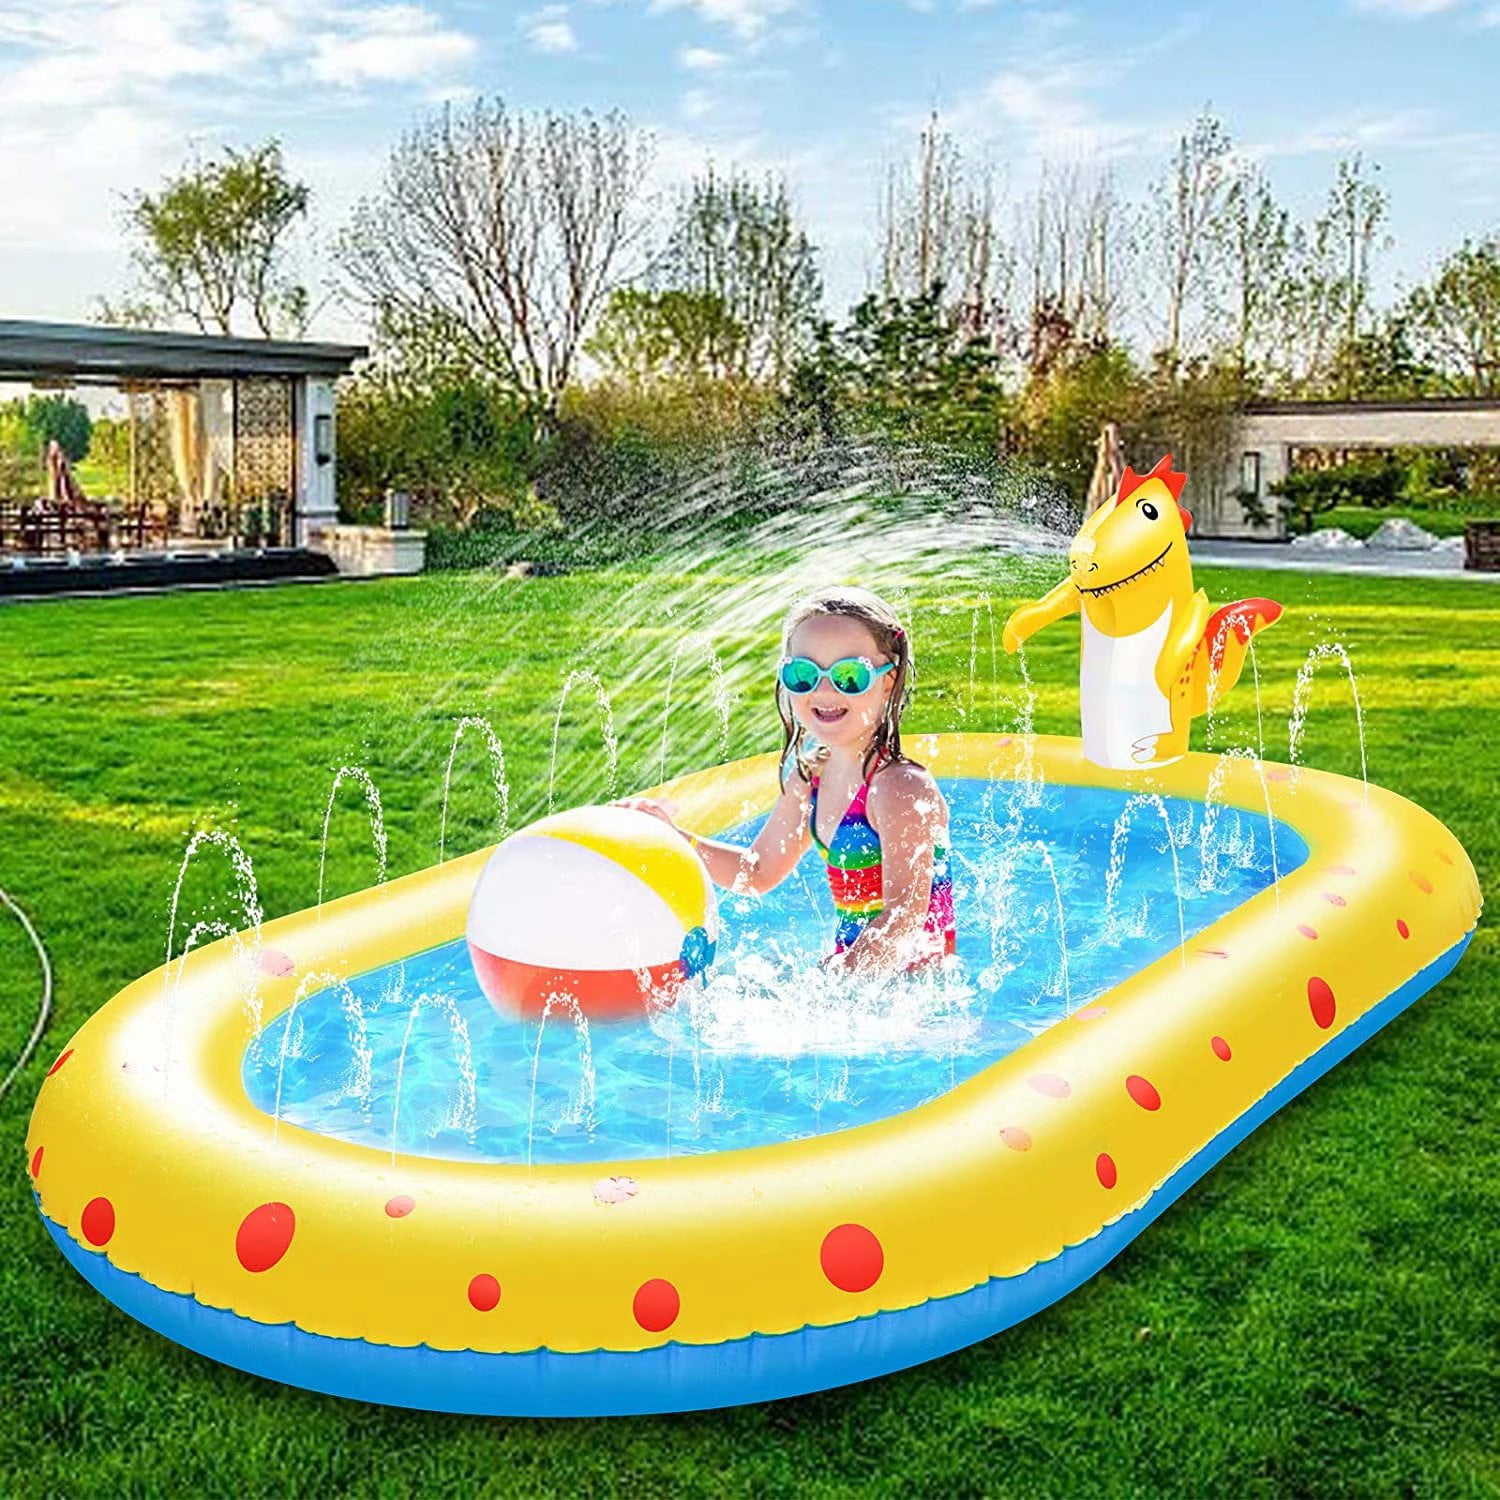 Water spray for kids outdoor summer swimming toys fast shipping from usa 